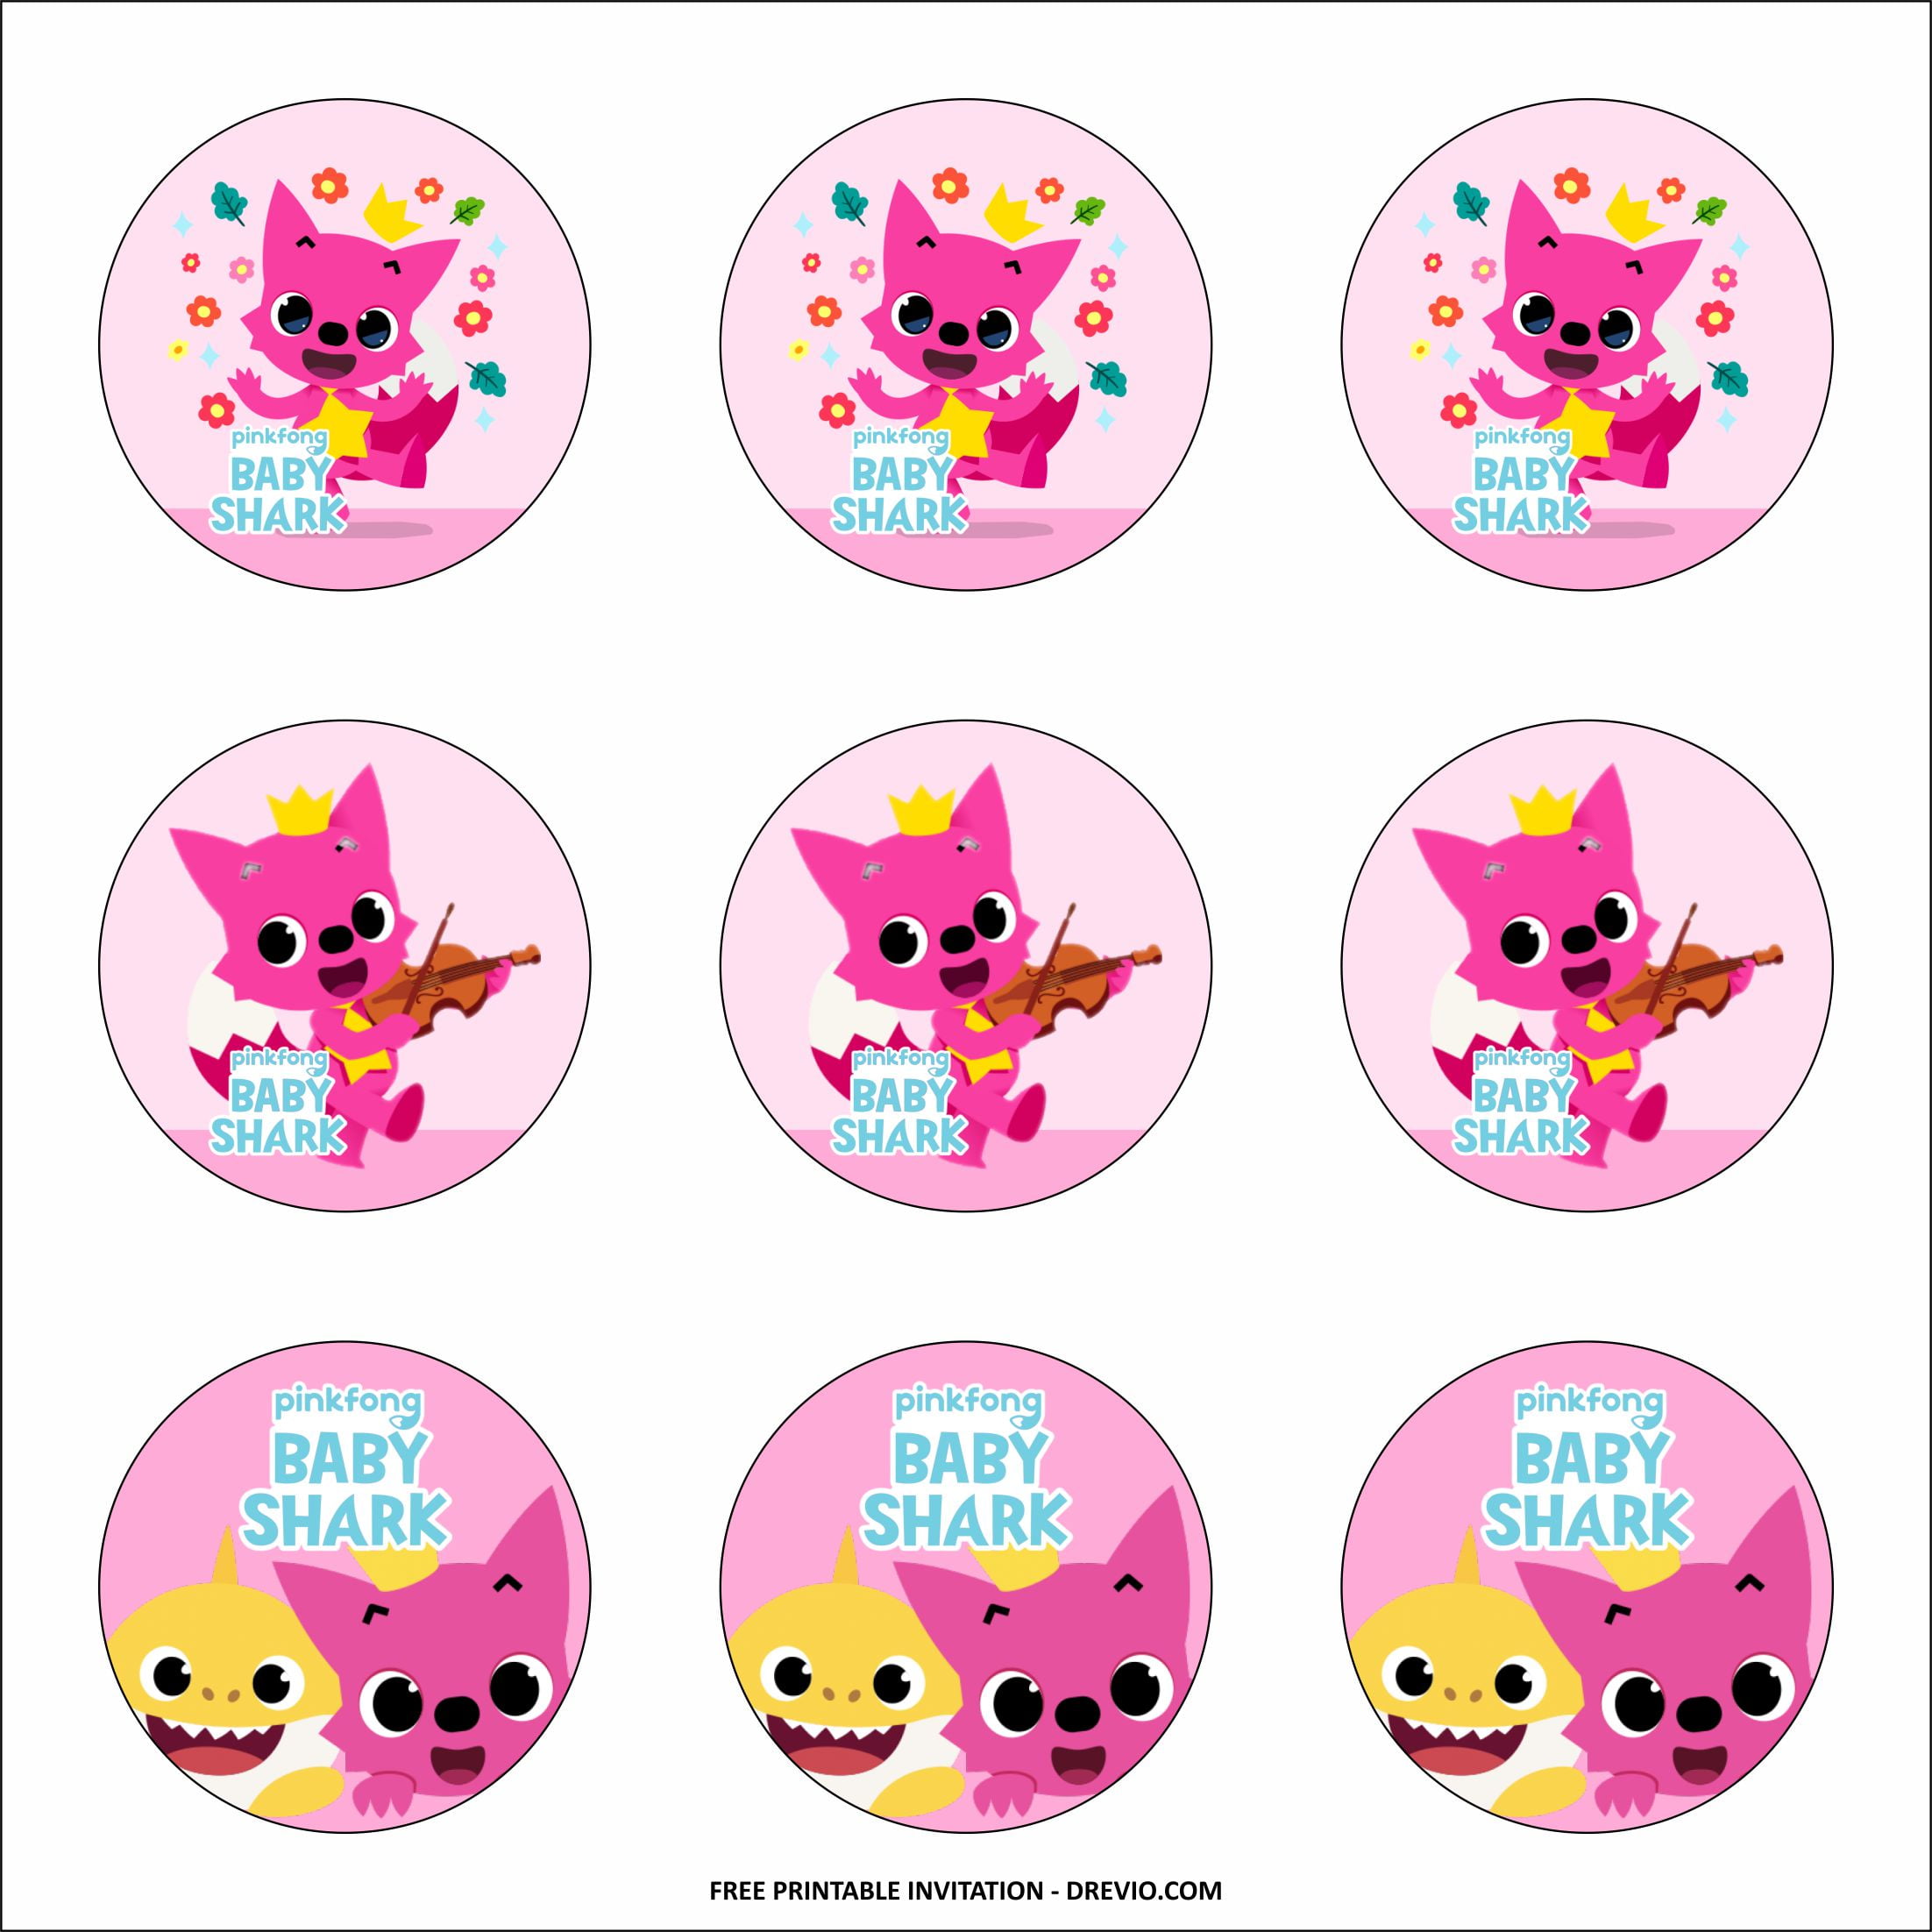 pinkfong-baby-shark-cupcake-toppers-templates-download-hundreds-free